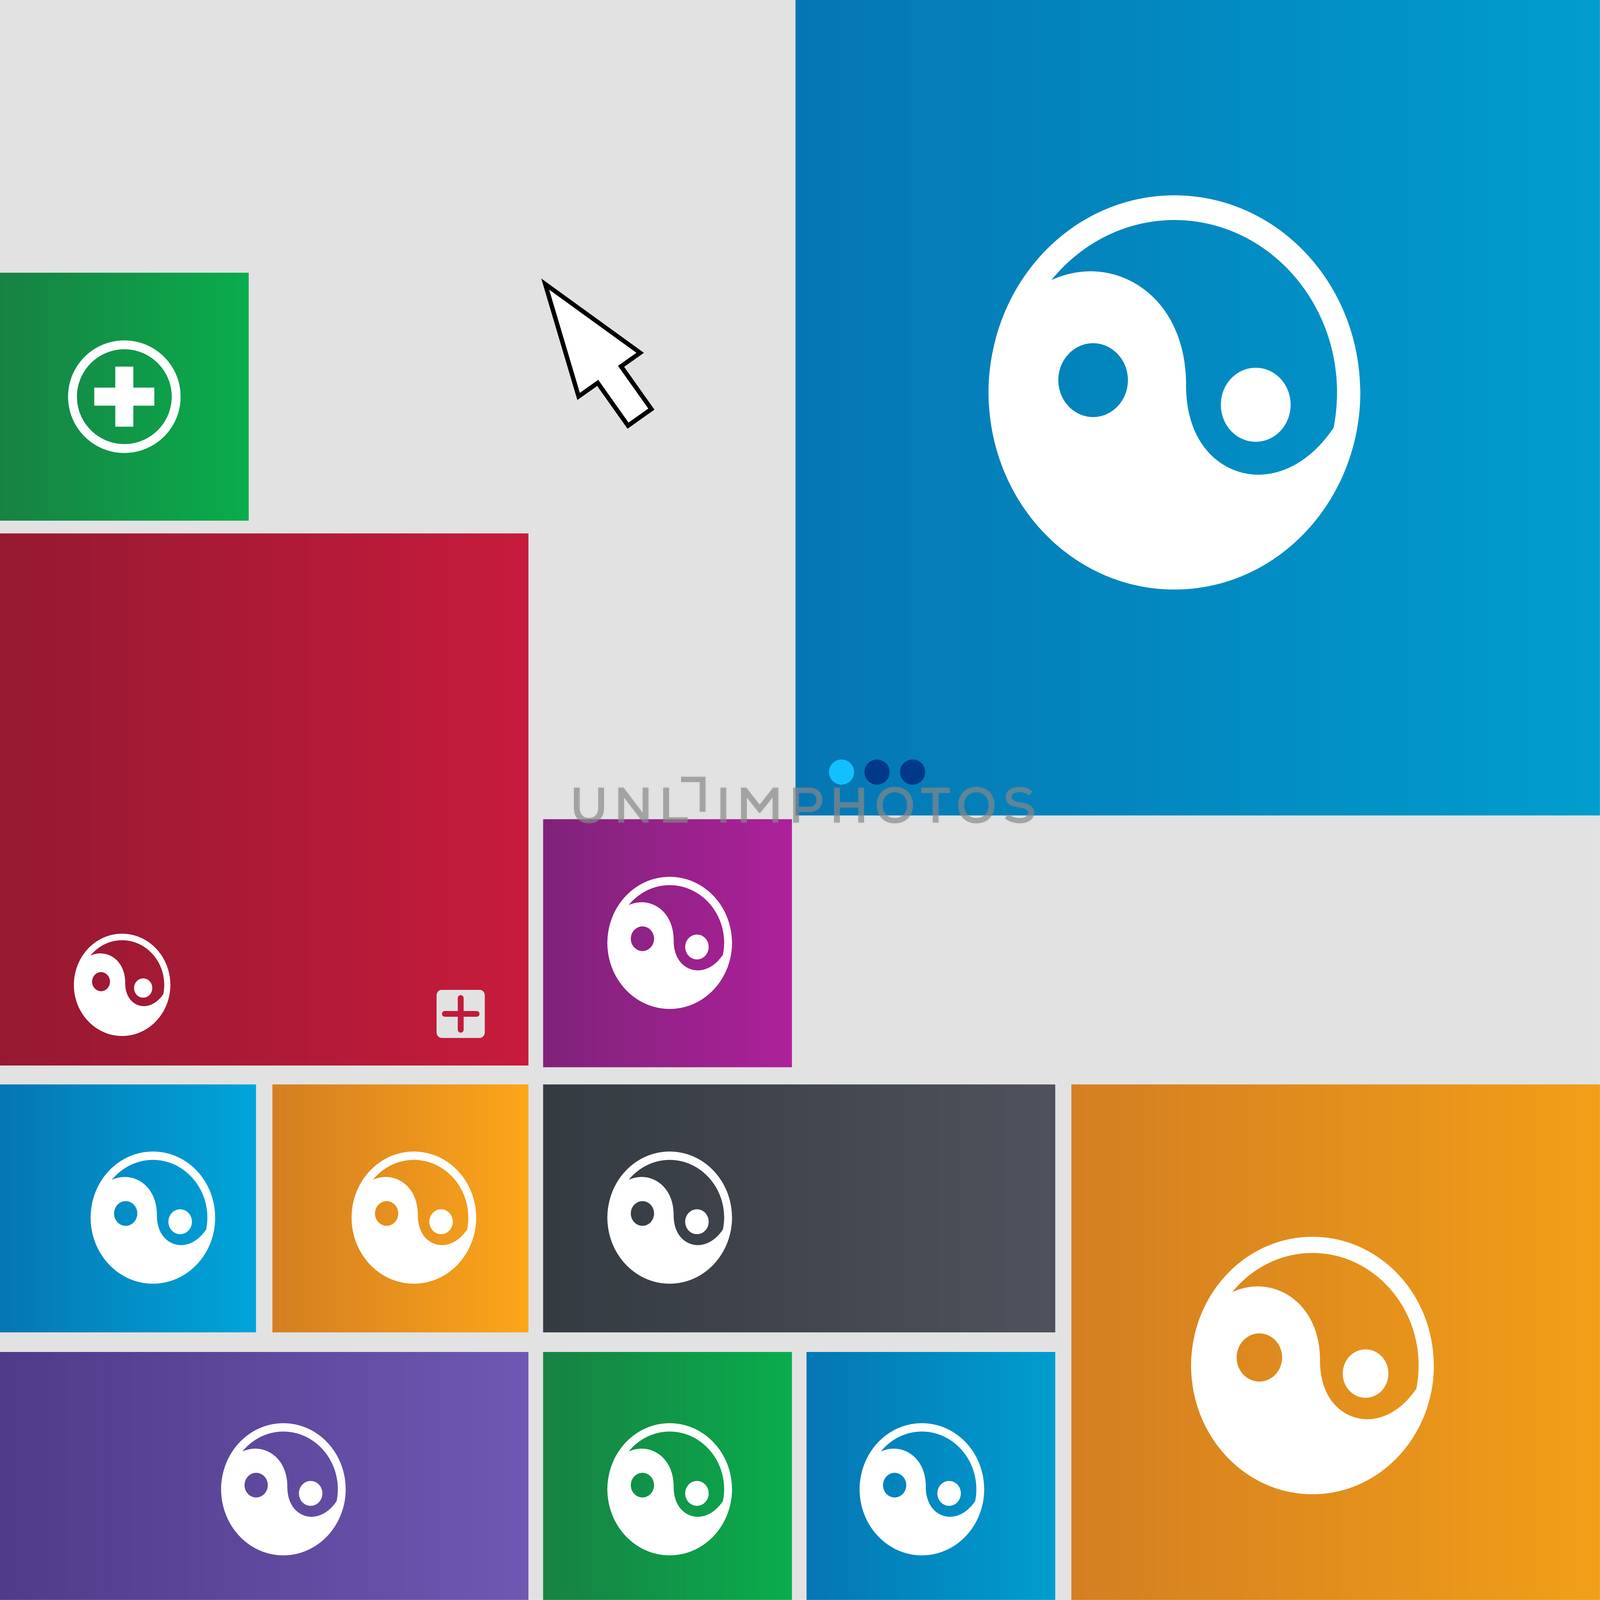 Ying yang icon sign. Metro style buttons. Modern interface website buttons with cursor pointer. illustration